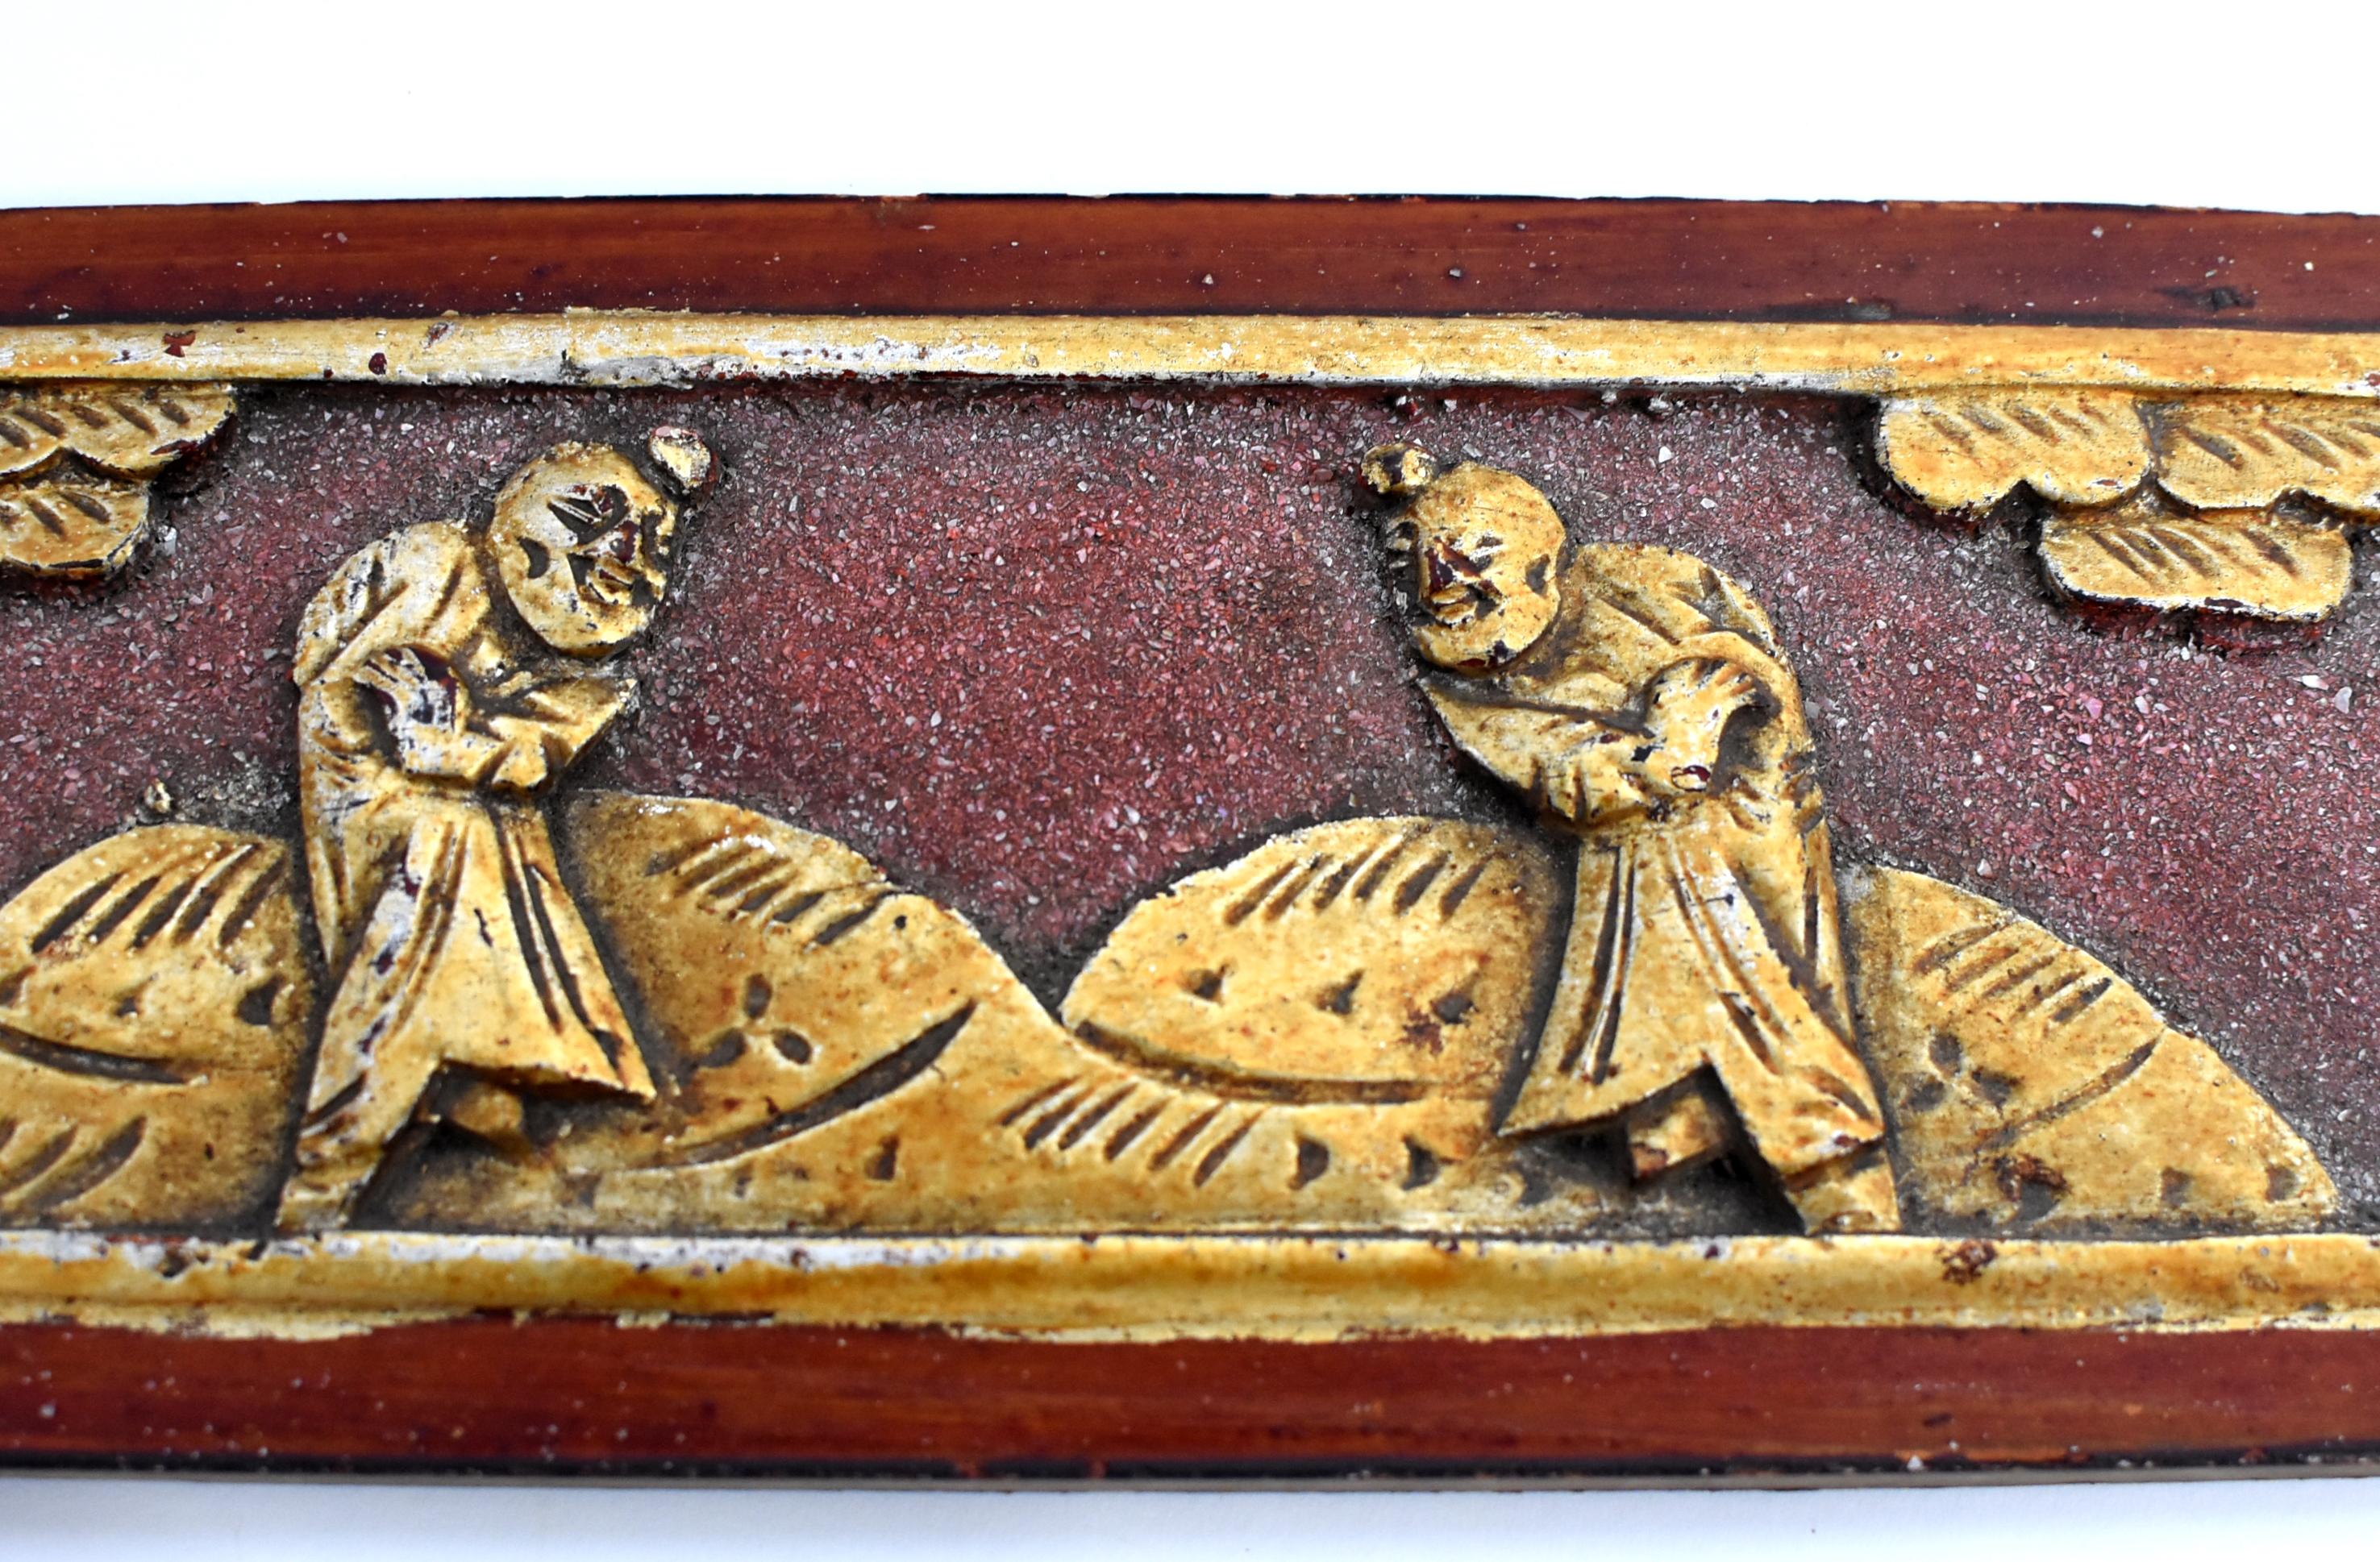 A wonderful set of two 19th century wood carvings, featuring two bothers practicing martial art in the garden. Pine trees symbolize longevity. Original red lacquer with gilding. Mother of pearl encrusted.